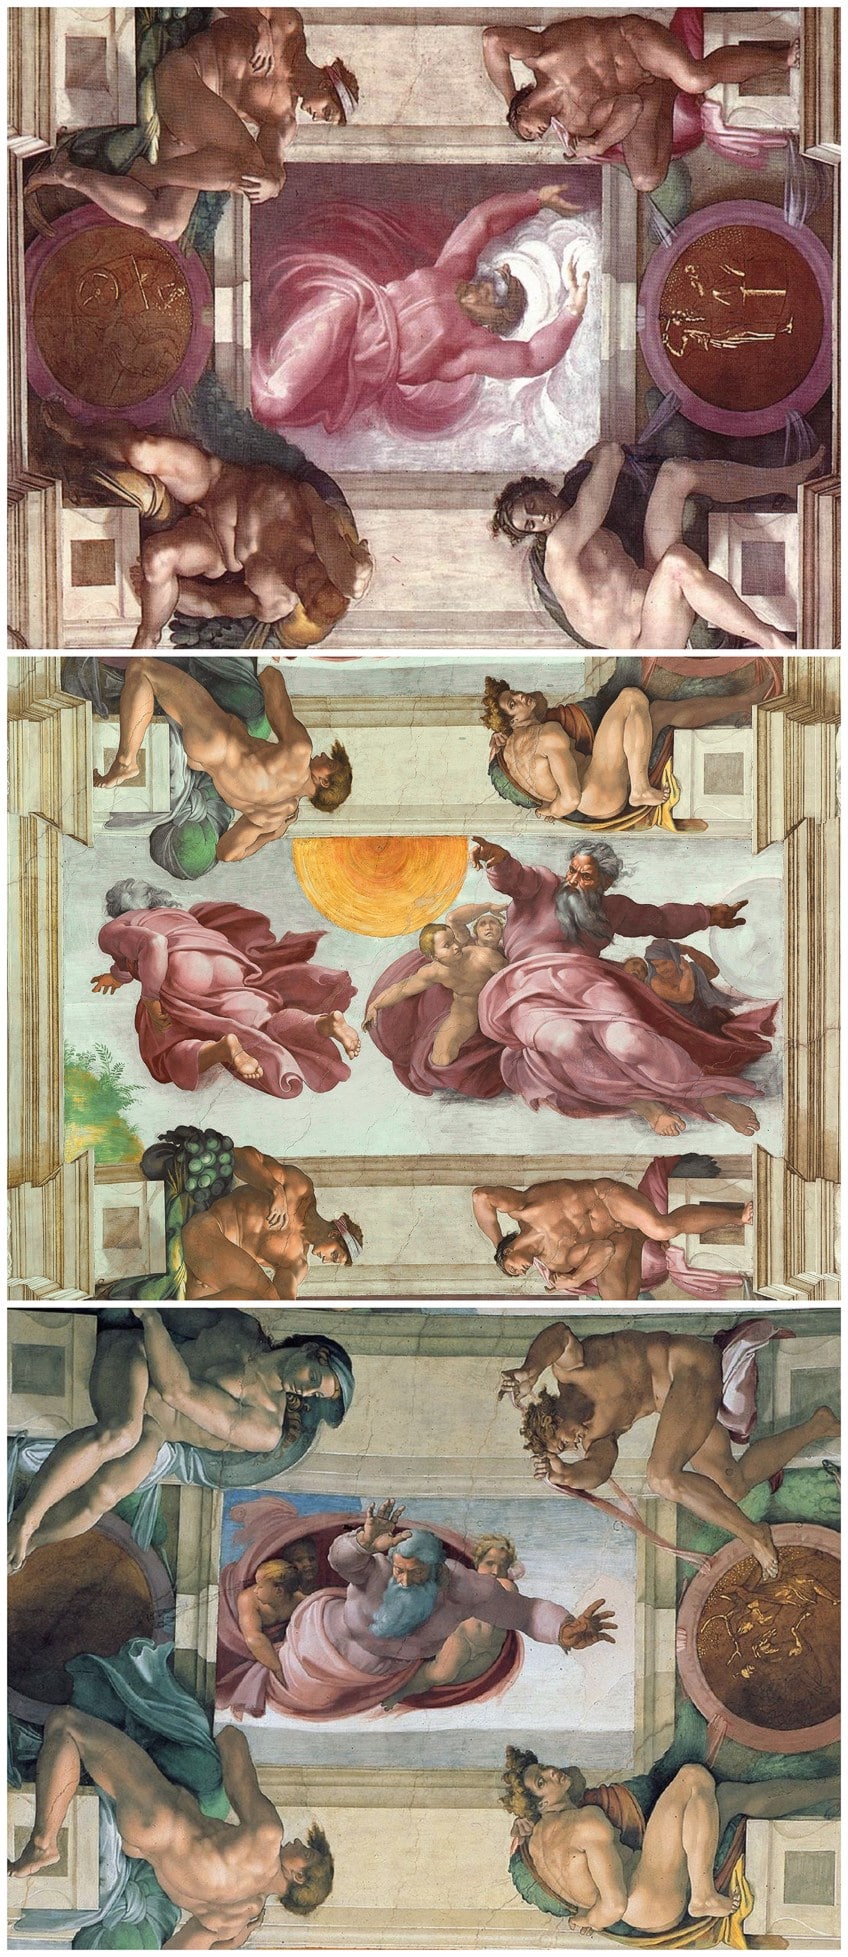 Painted Ceiling of the Sistine Chapel